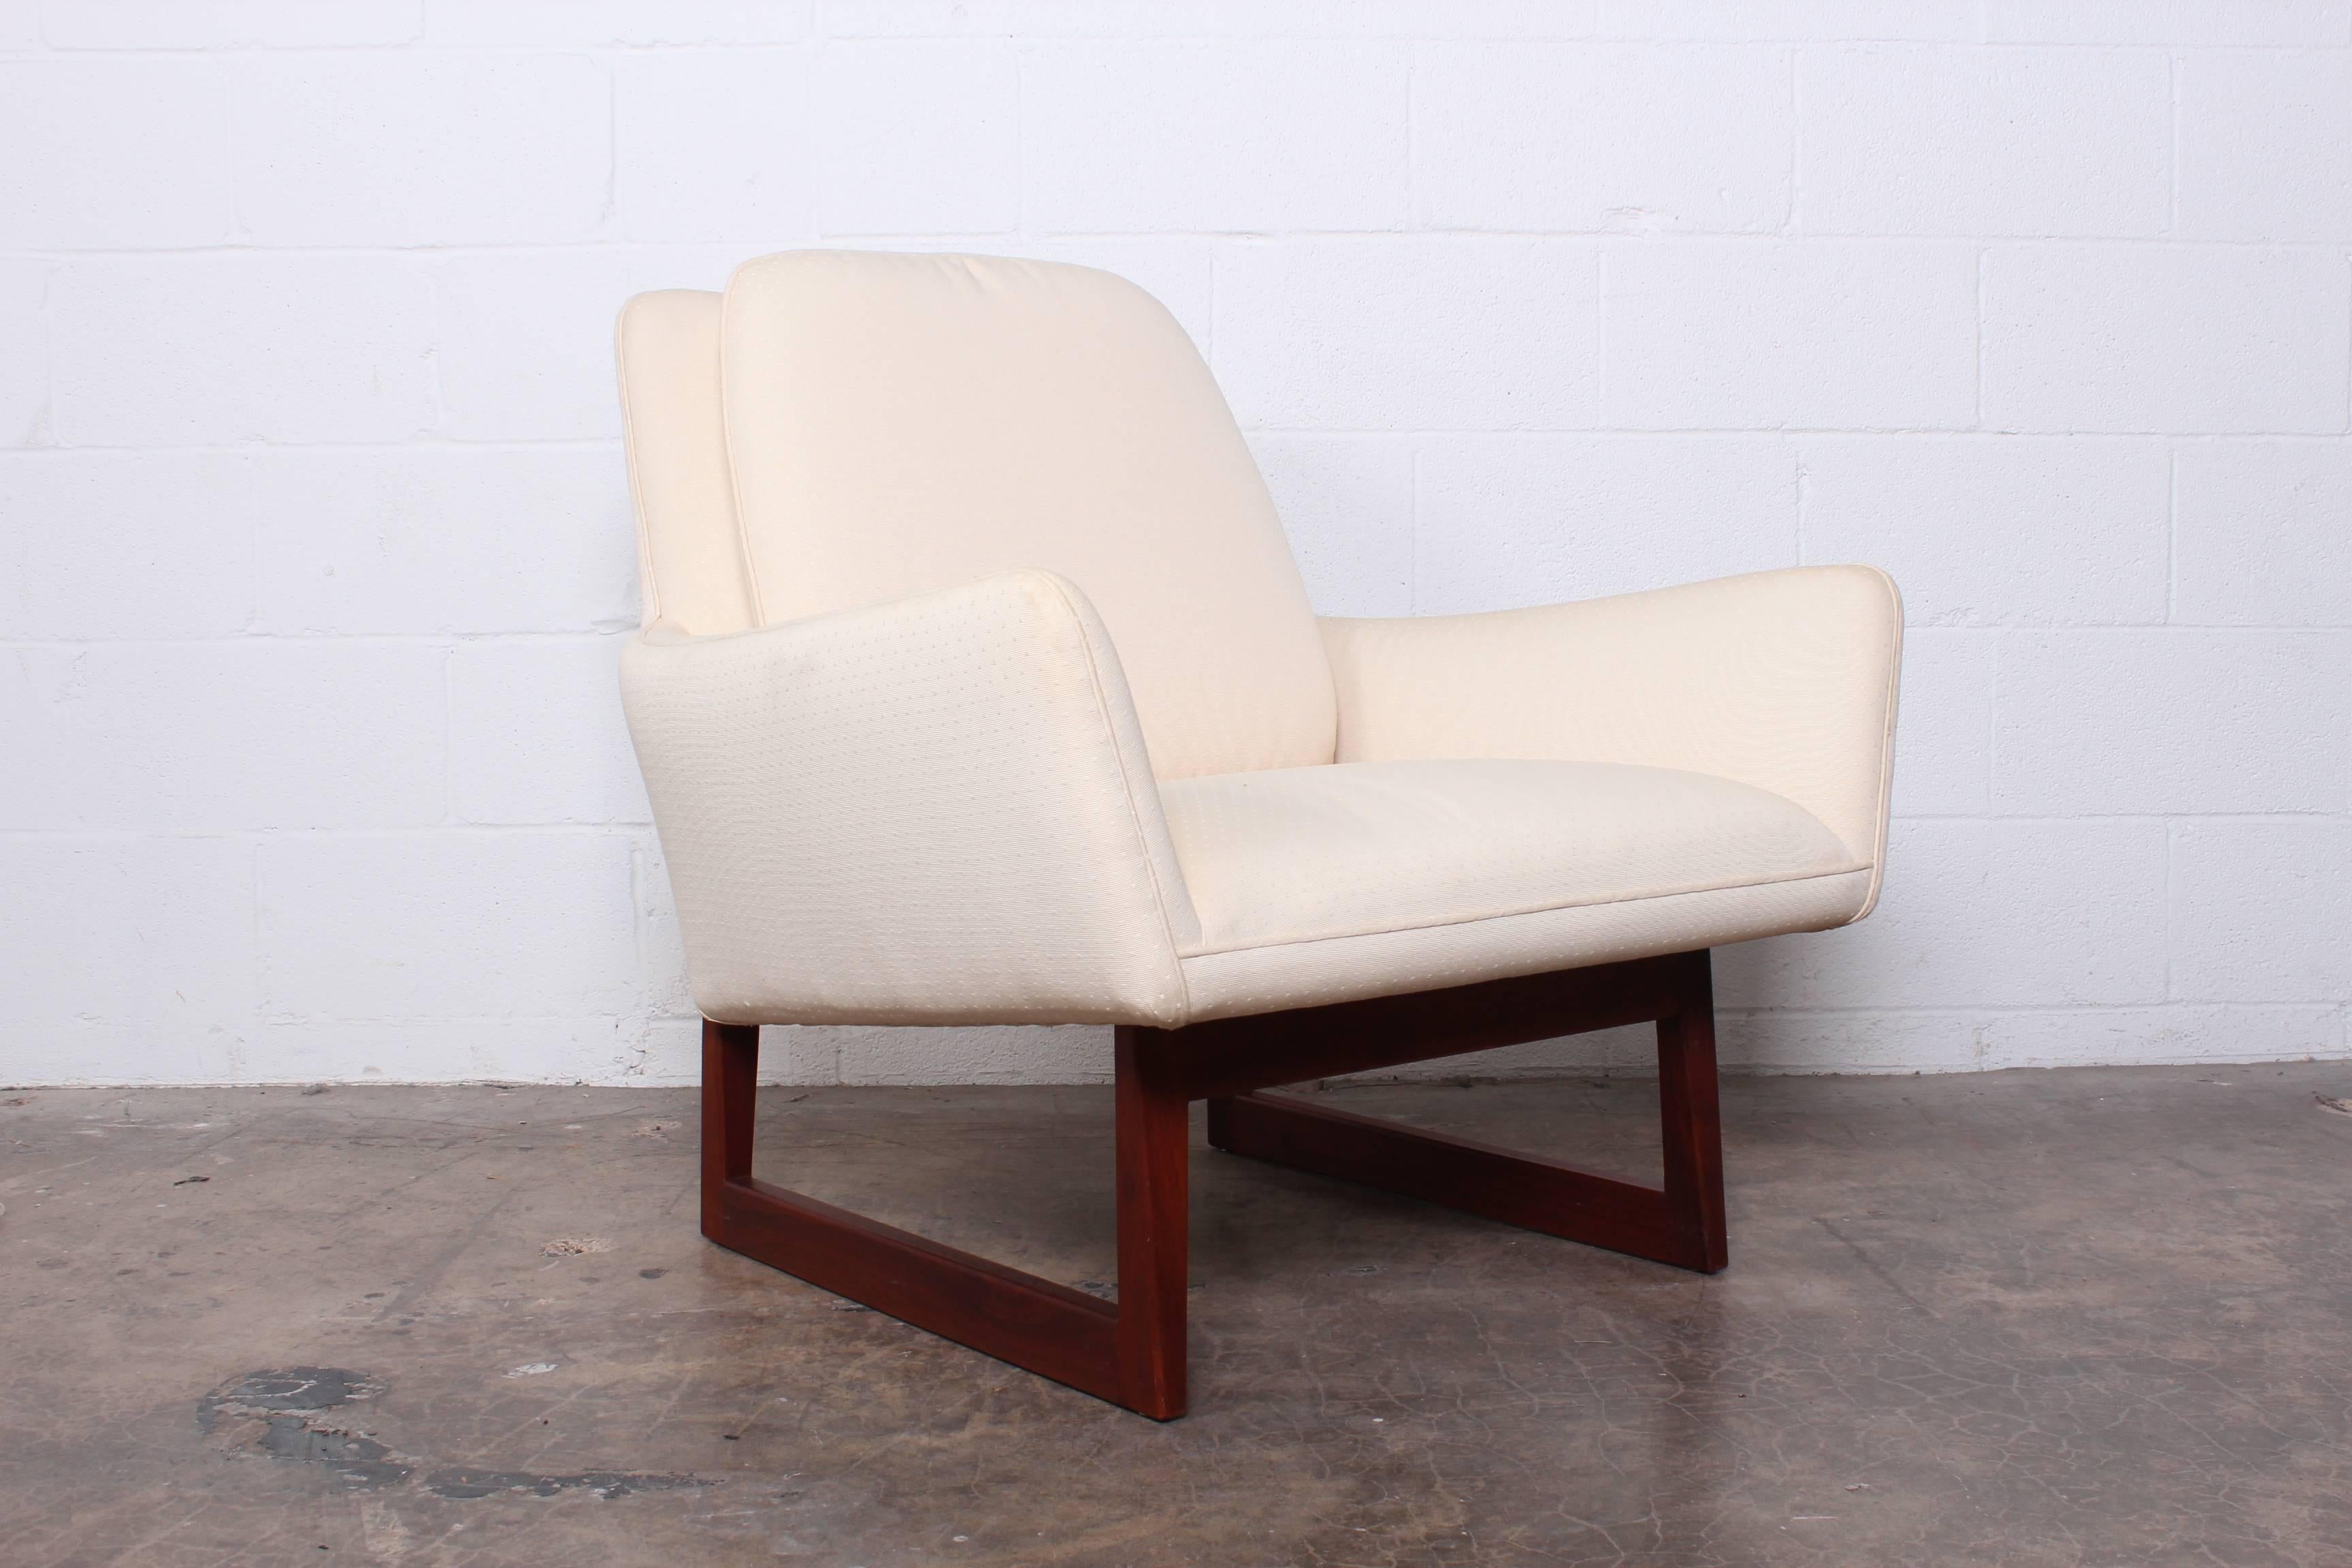 Mid-20th Century Pair of Lounge Chairs by Jens Risom